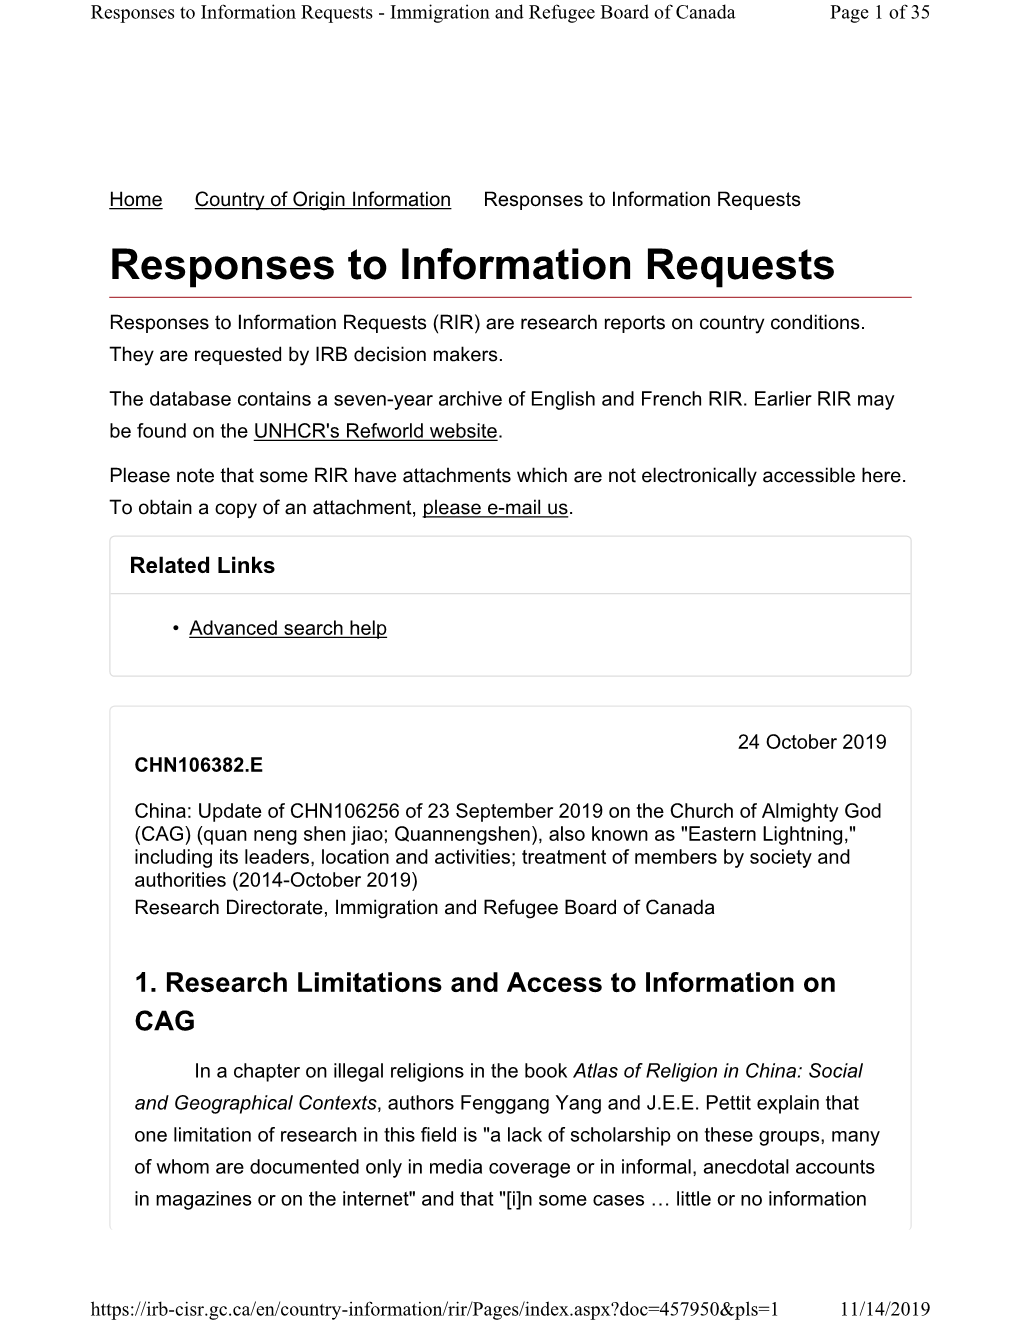 Responses to Information Requests - Immigration and Refugee Board of Canada Page 1 of 35